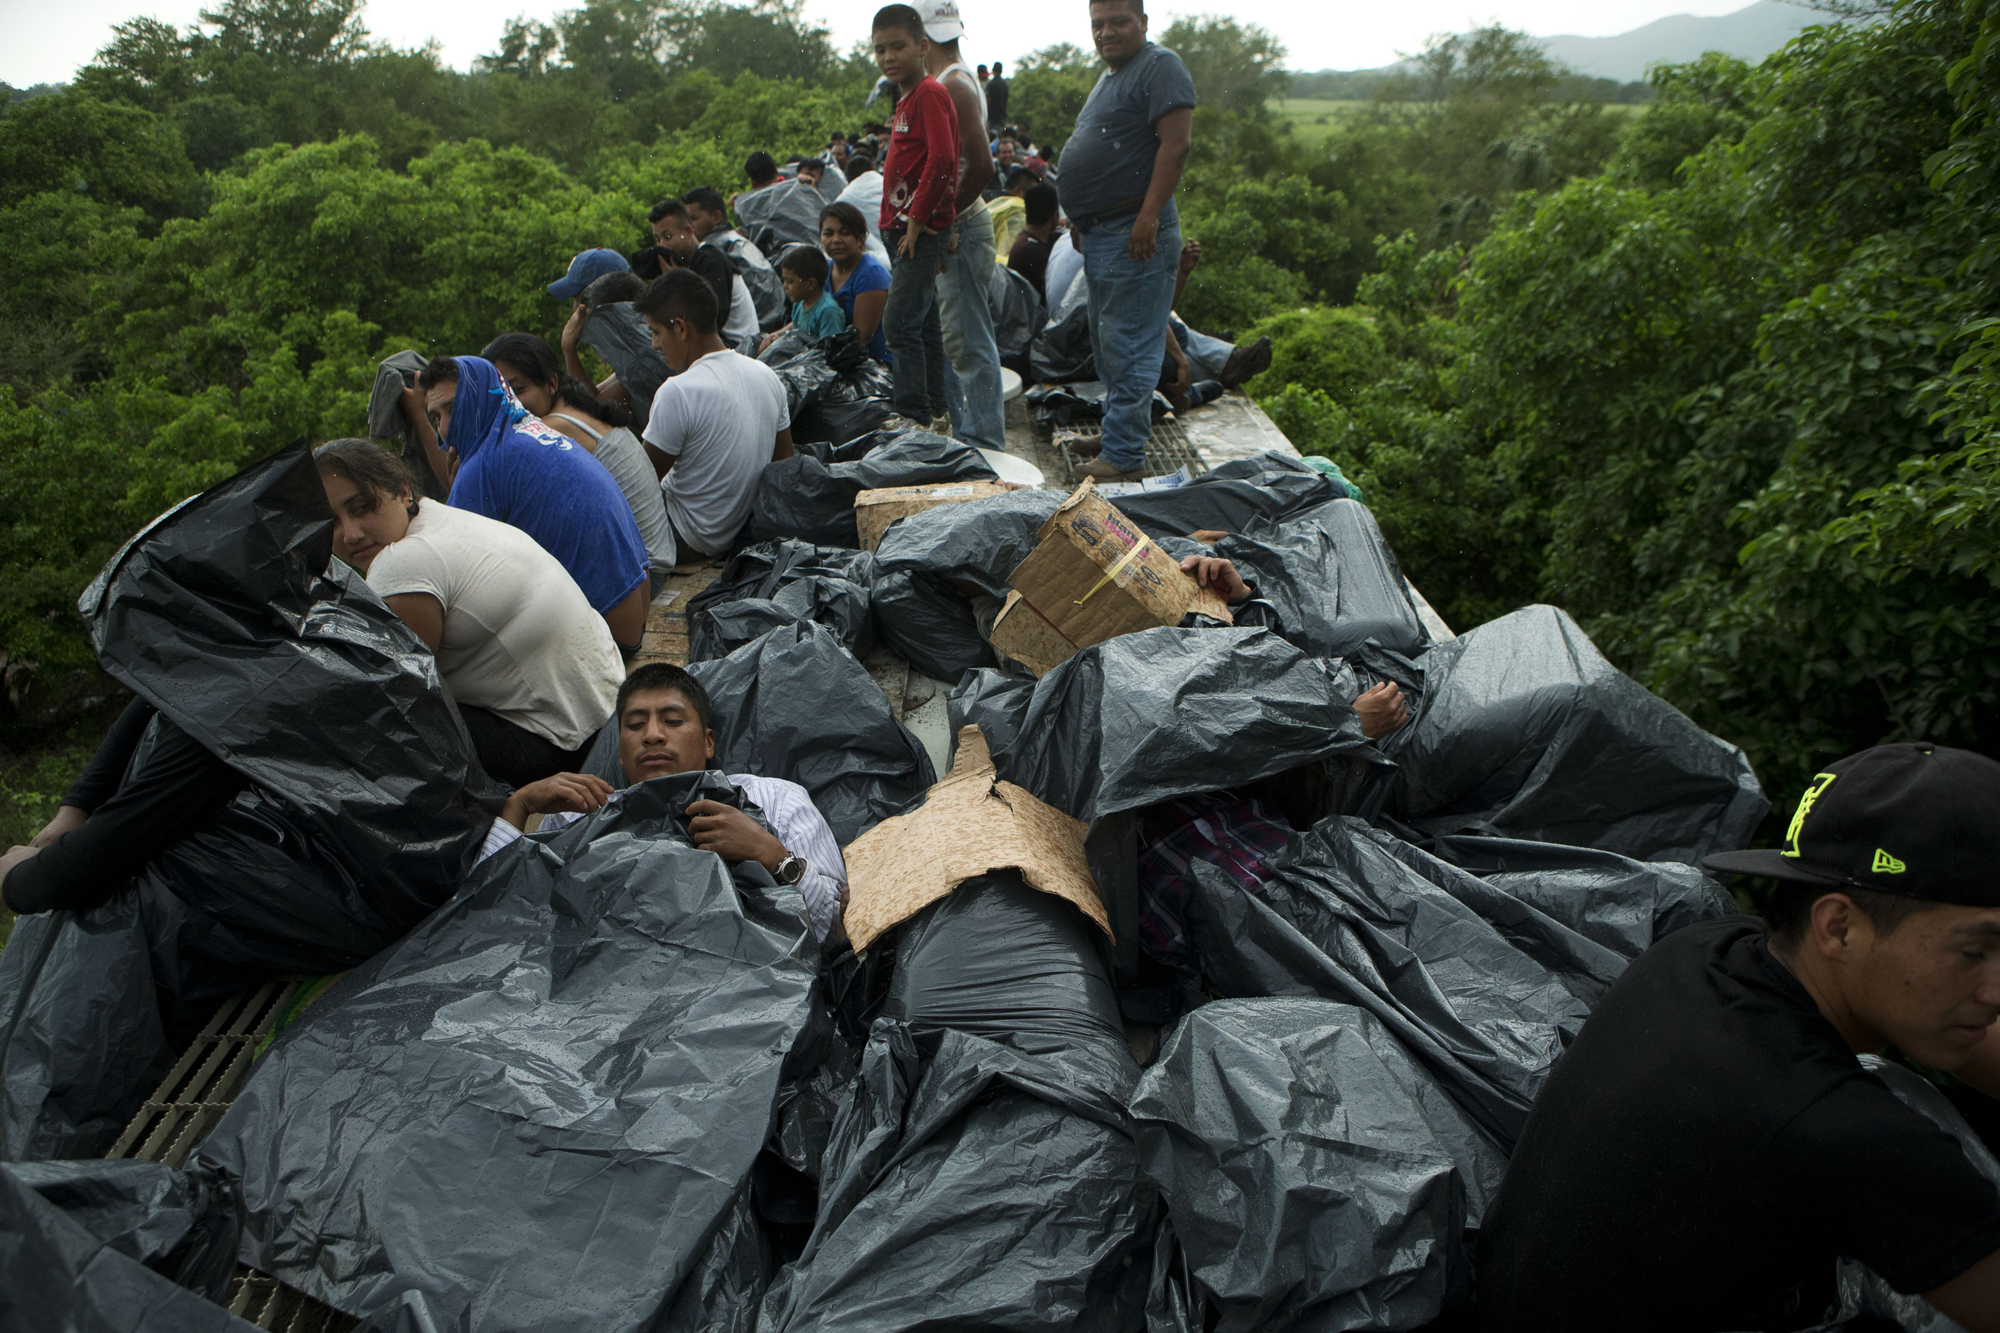 Central American migrants use trash bags and cardboard to protect themselves from the rain as they wait atop a stuck freight train, outside Reforma de Pineda, Chiapas state, Mexico, June 20, 2014.